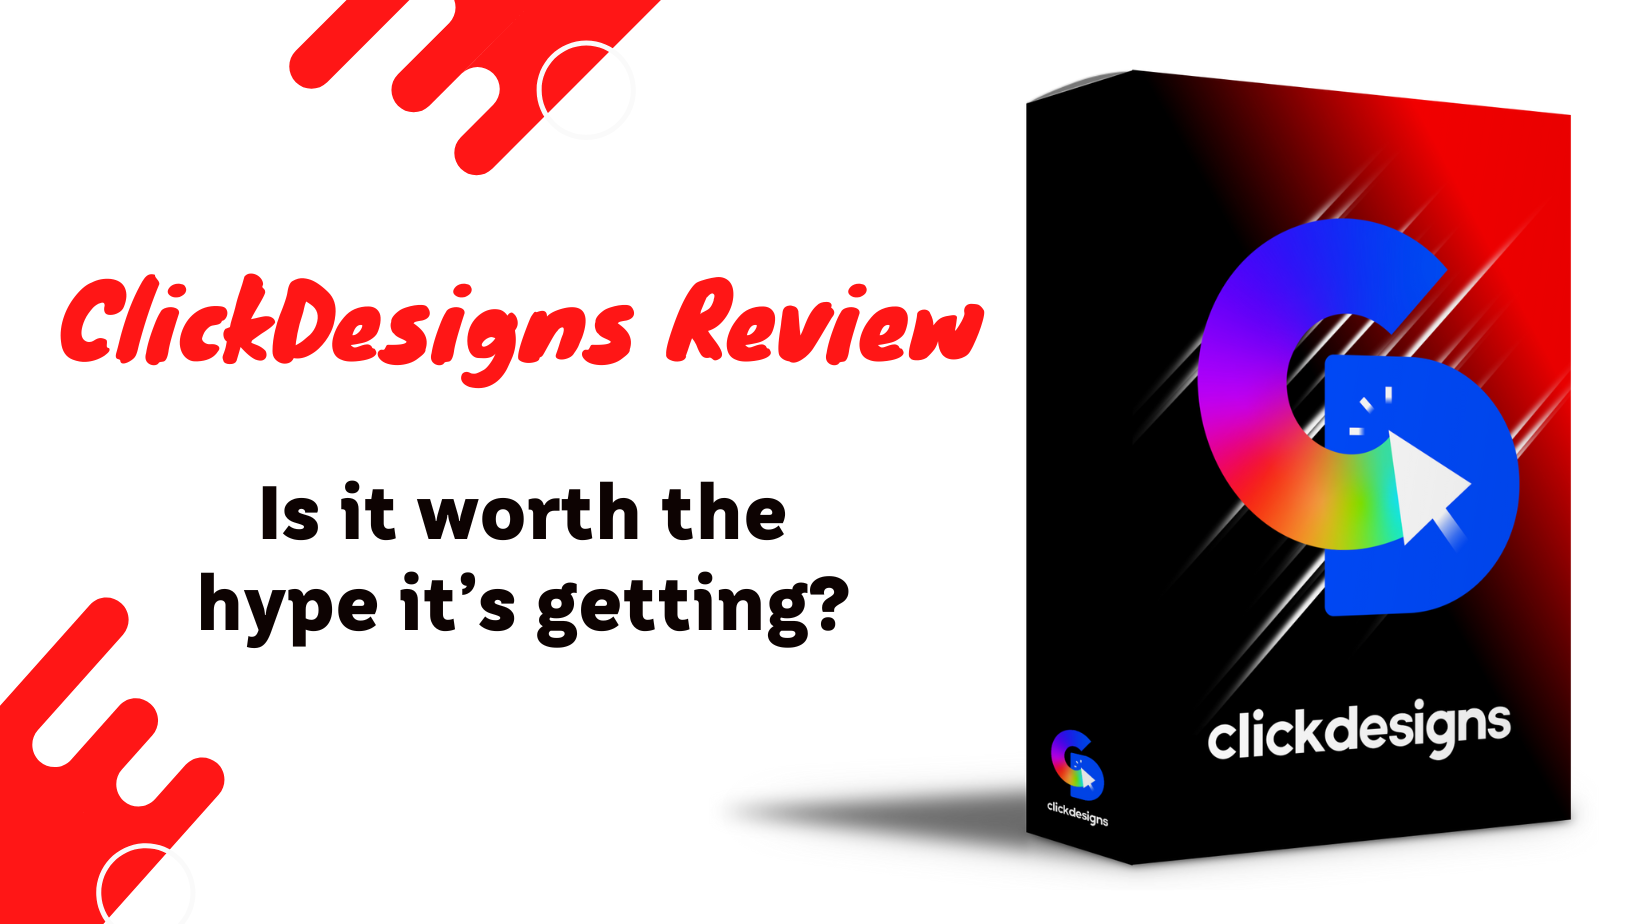 ClickDesigns Review: Is it worth the hype it’s getting?